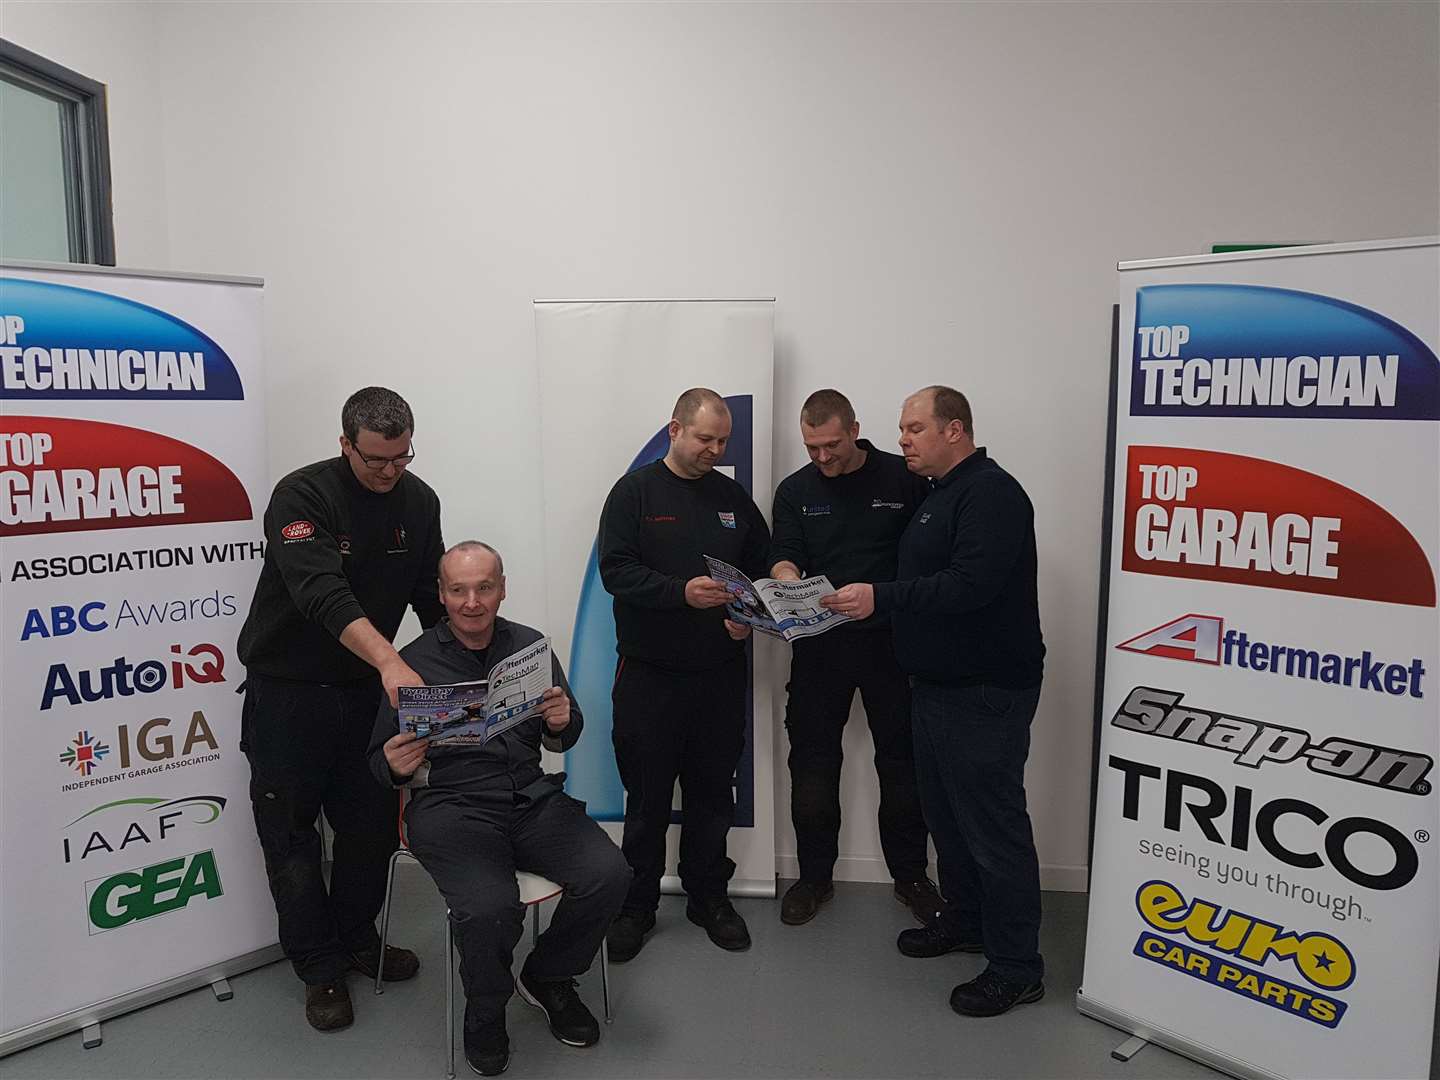 Murdo Macleod (seated) with other semi-finalists in the Top Technician of 2019 competition.